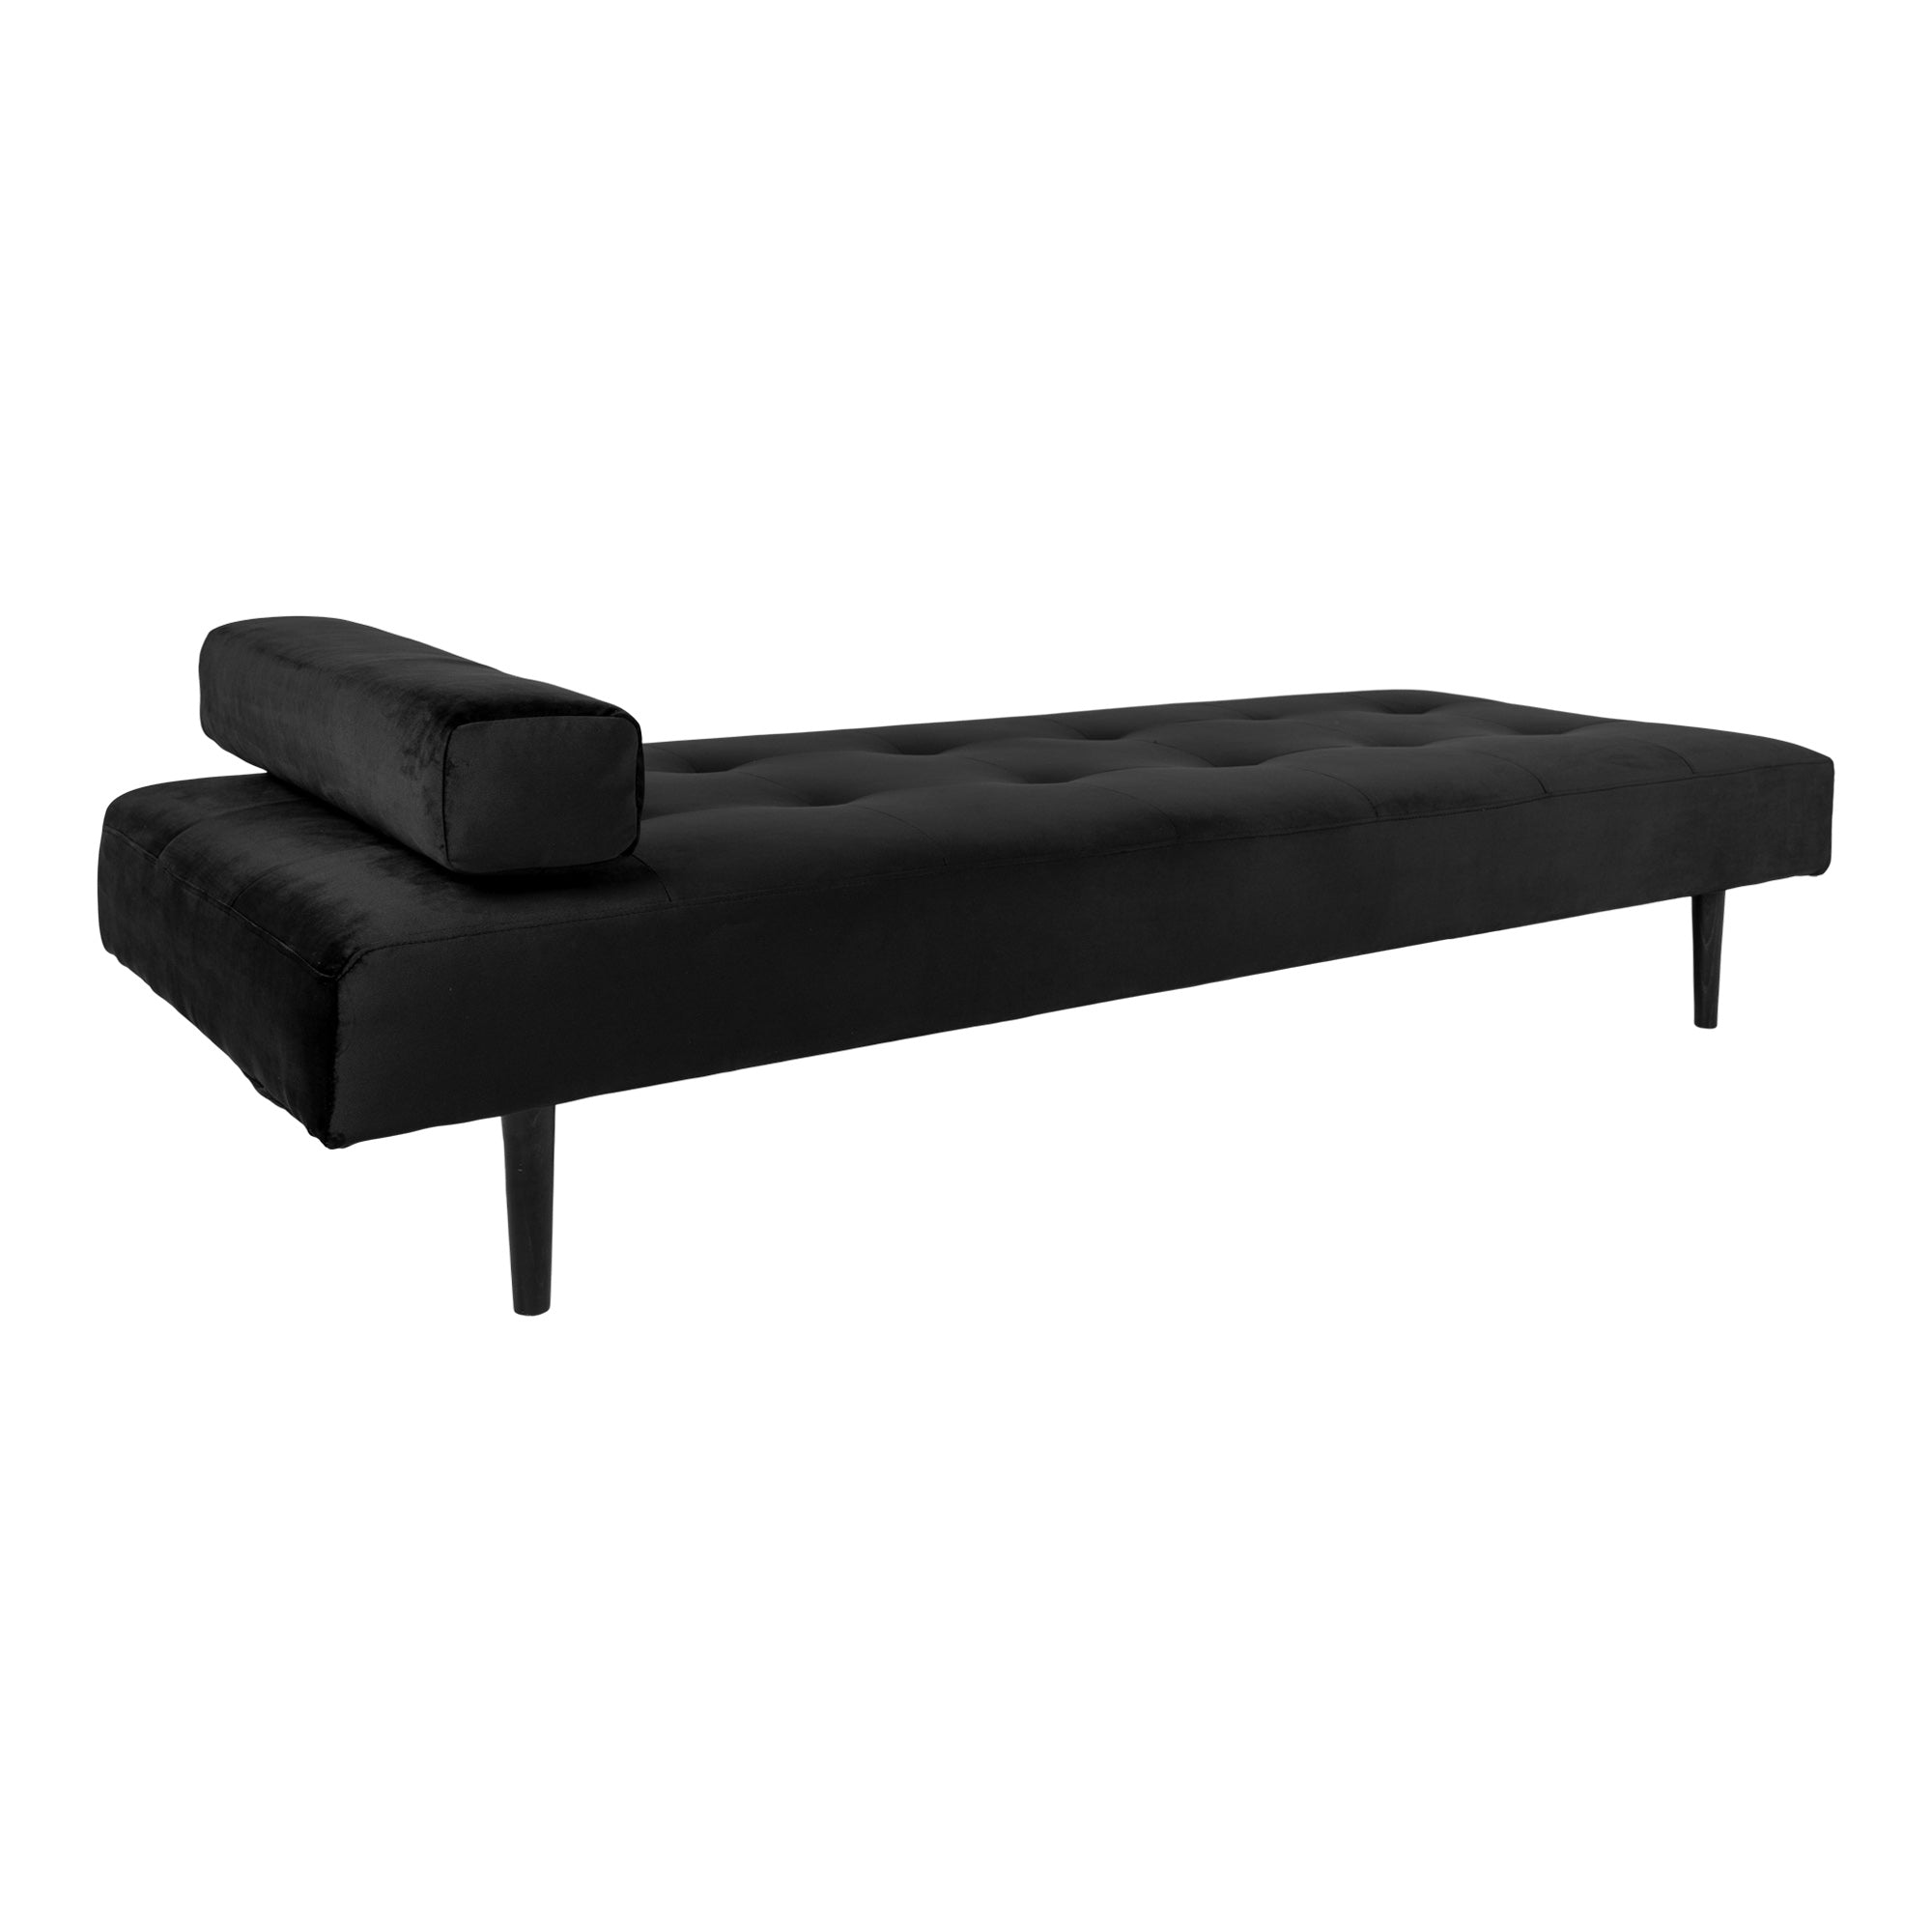 Duermo London Daybed